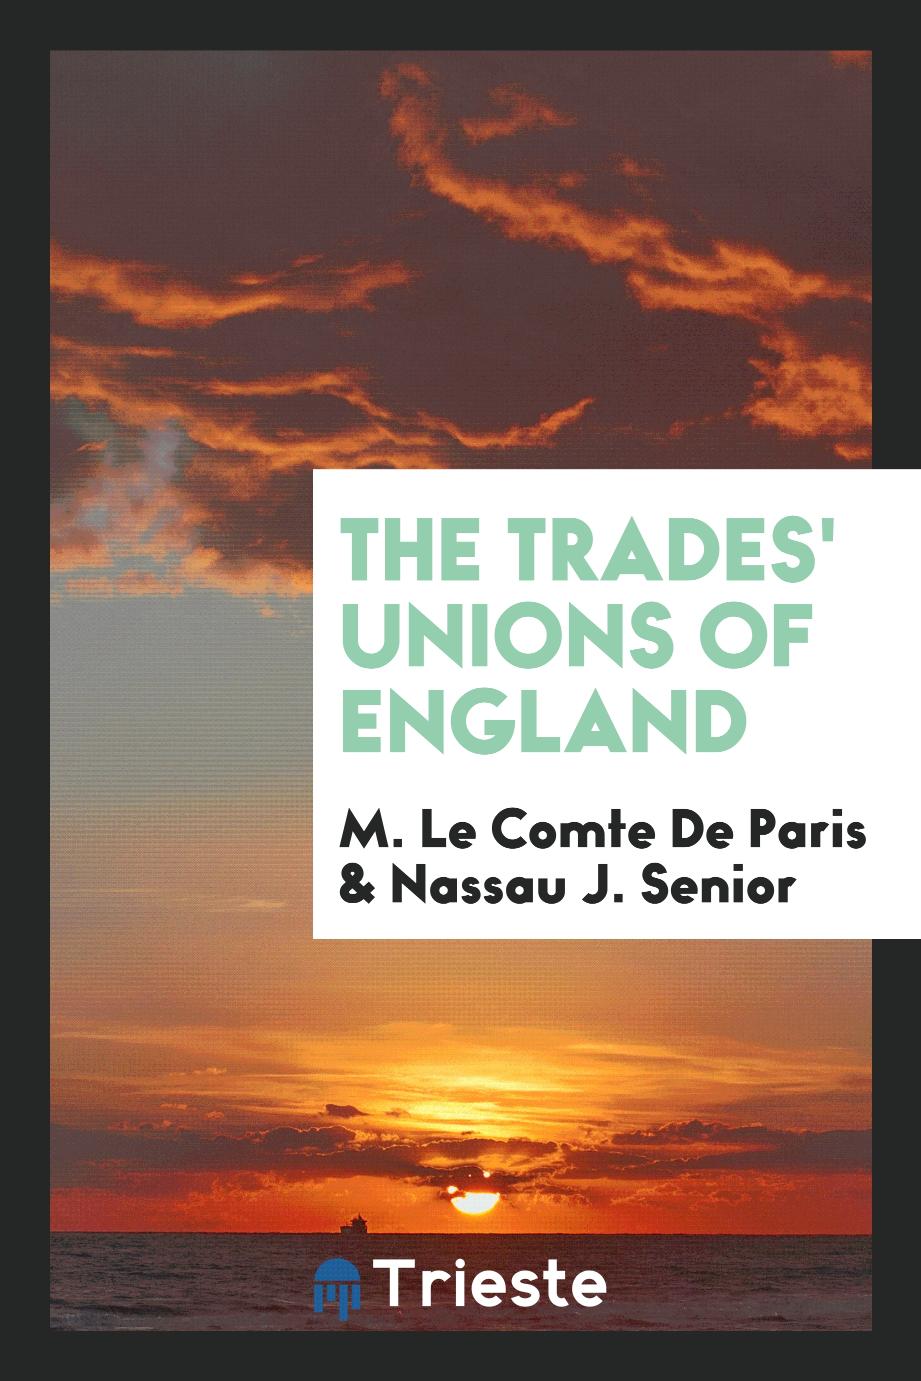 The trades' unions of England